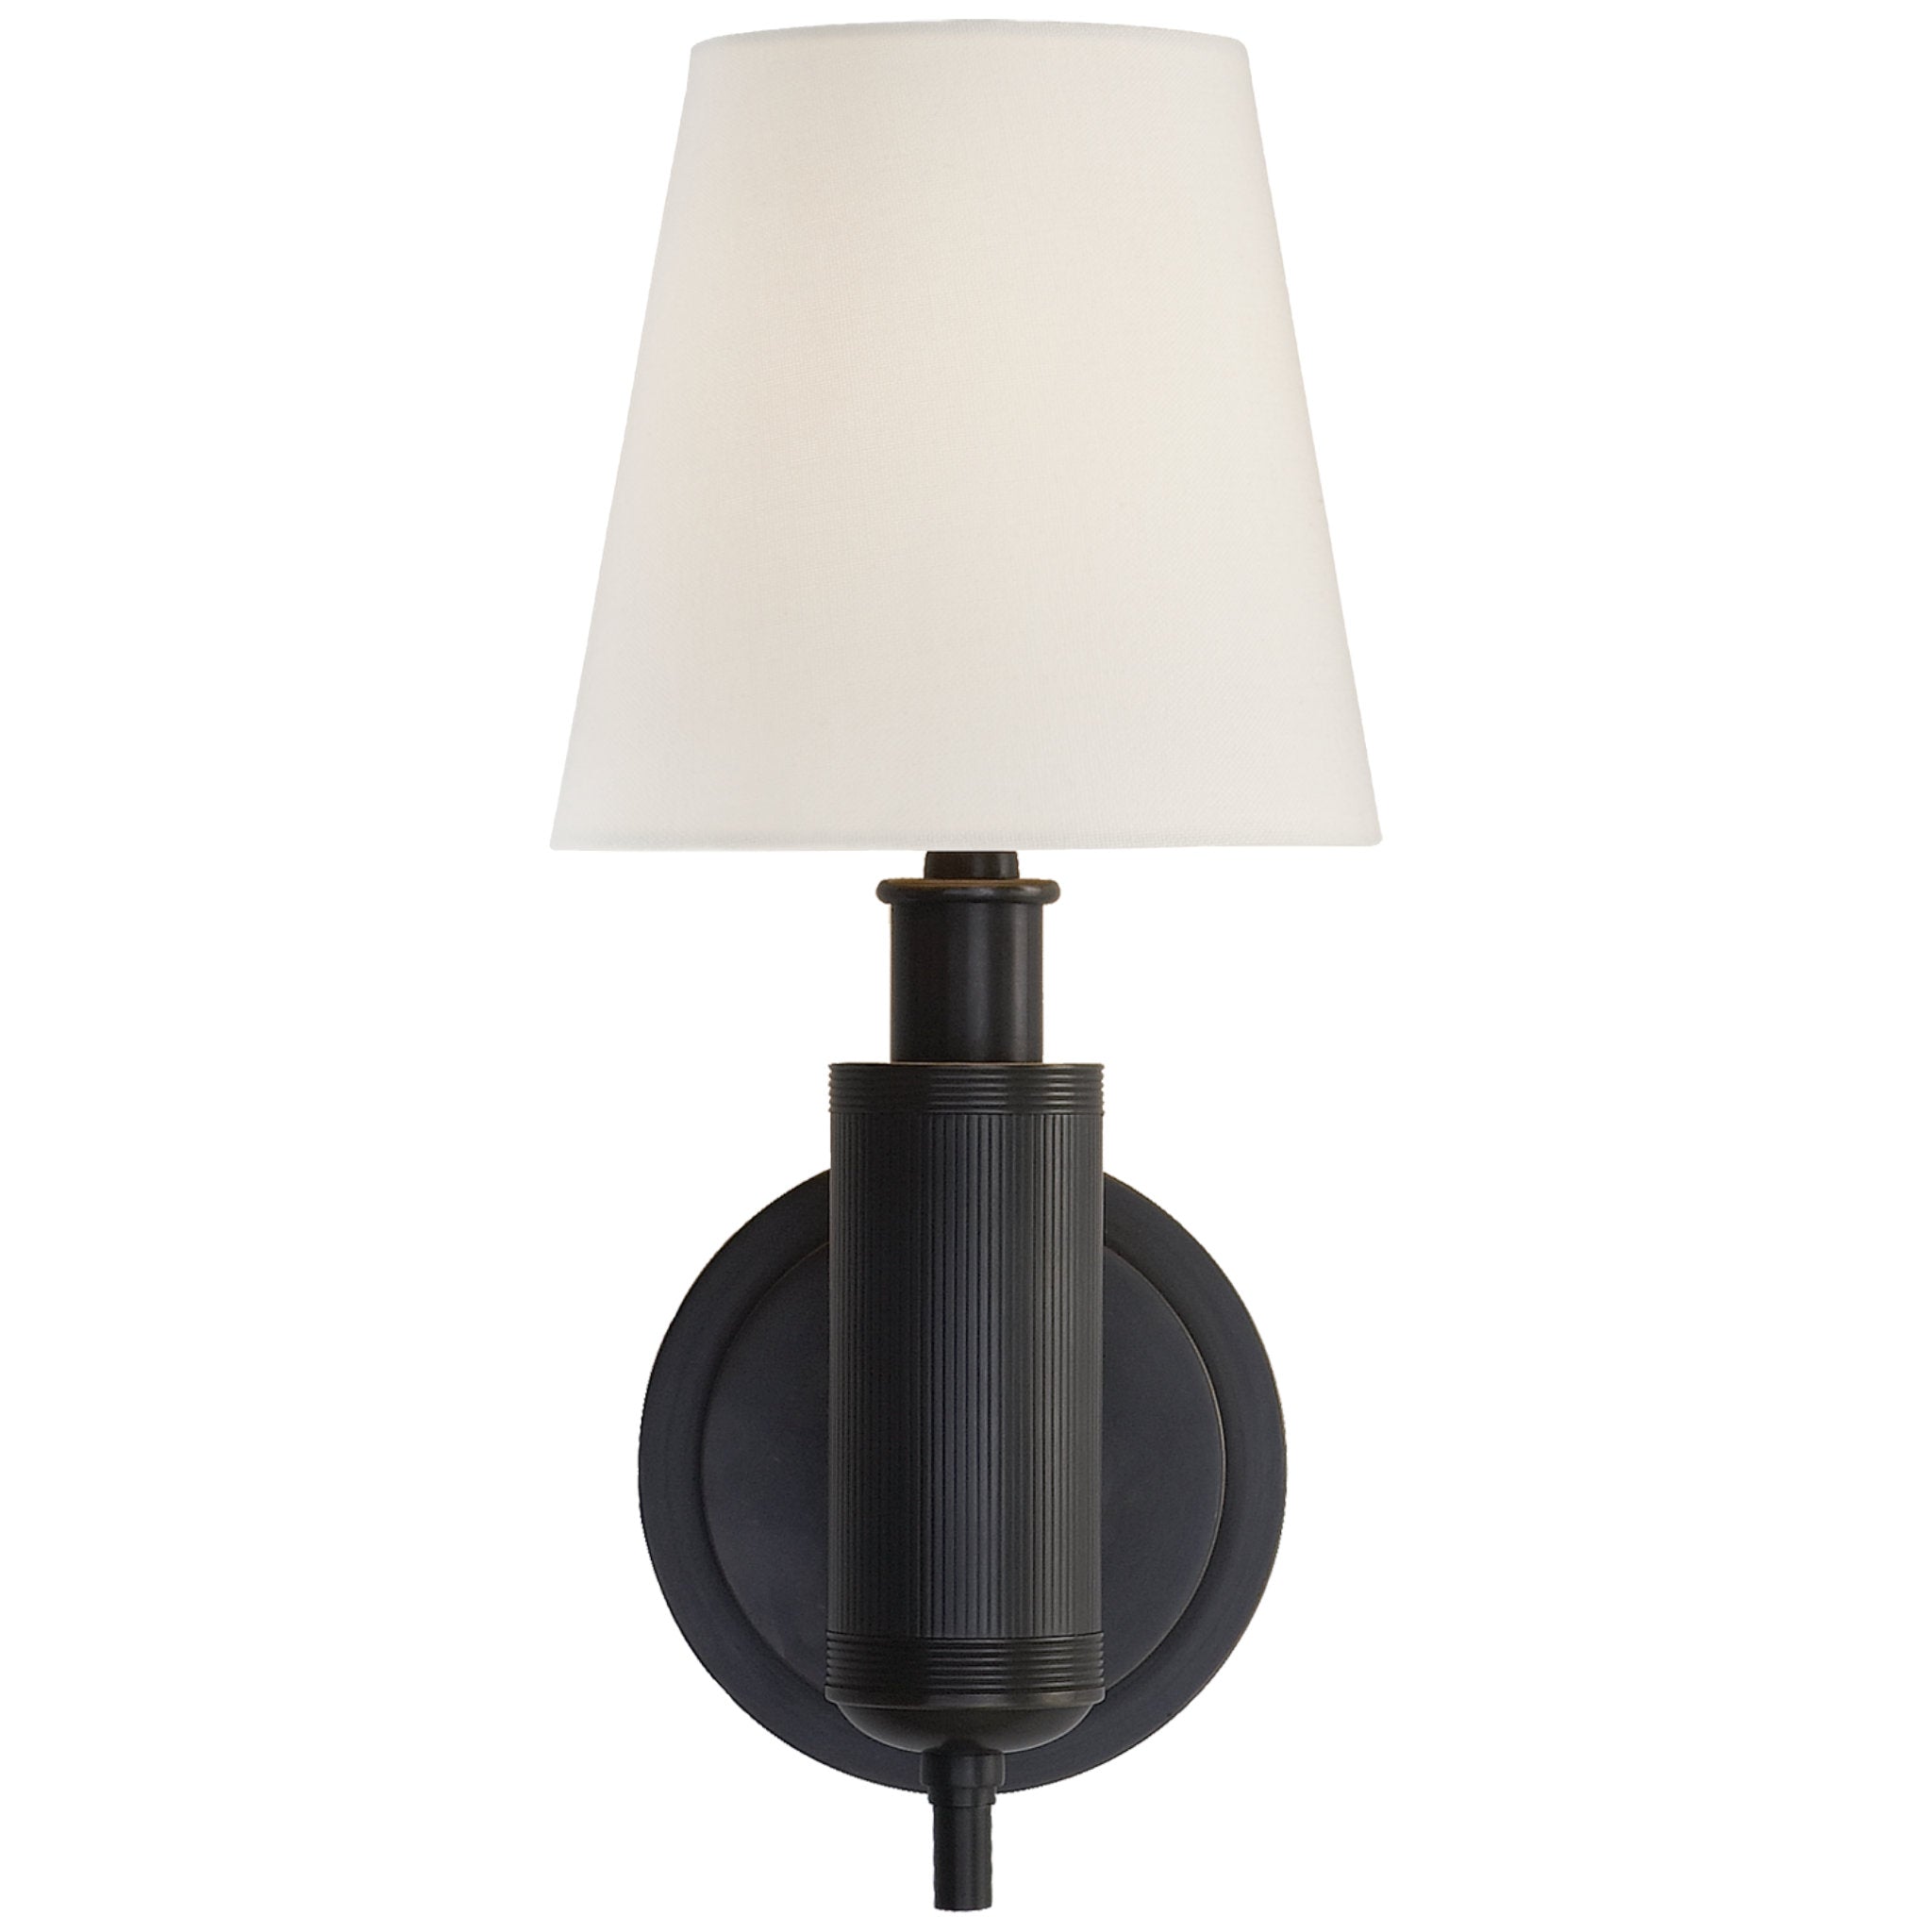 Thomas O'Brien Longacre Sconce in Bronze with Linen Shade